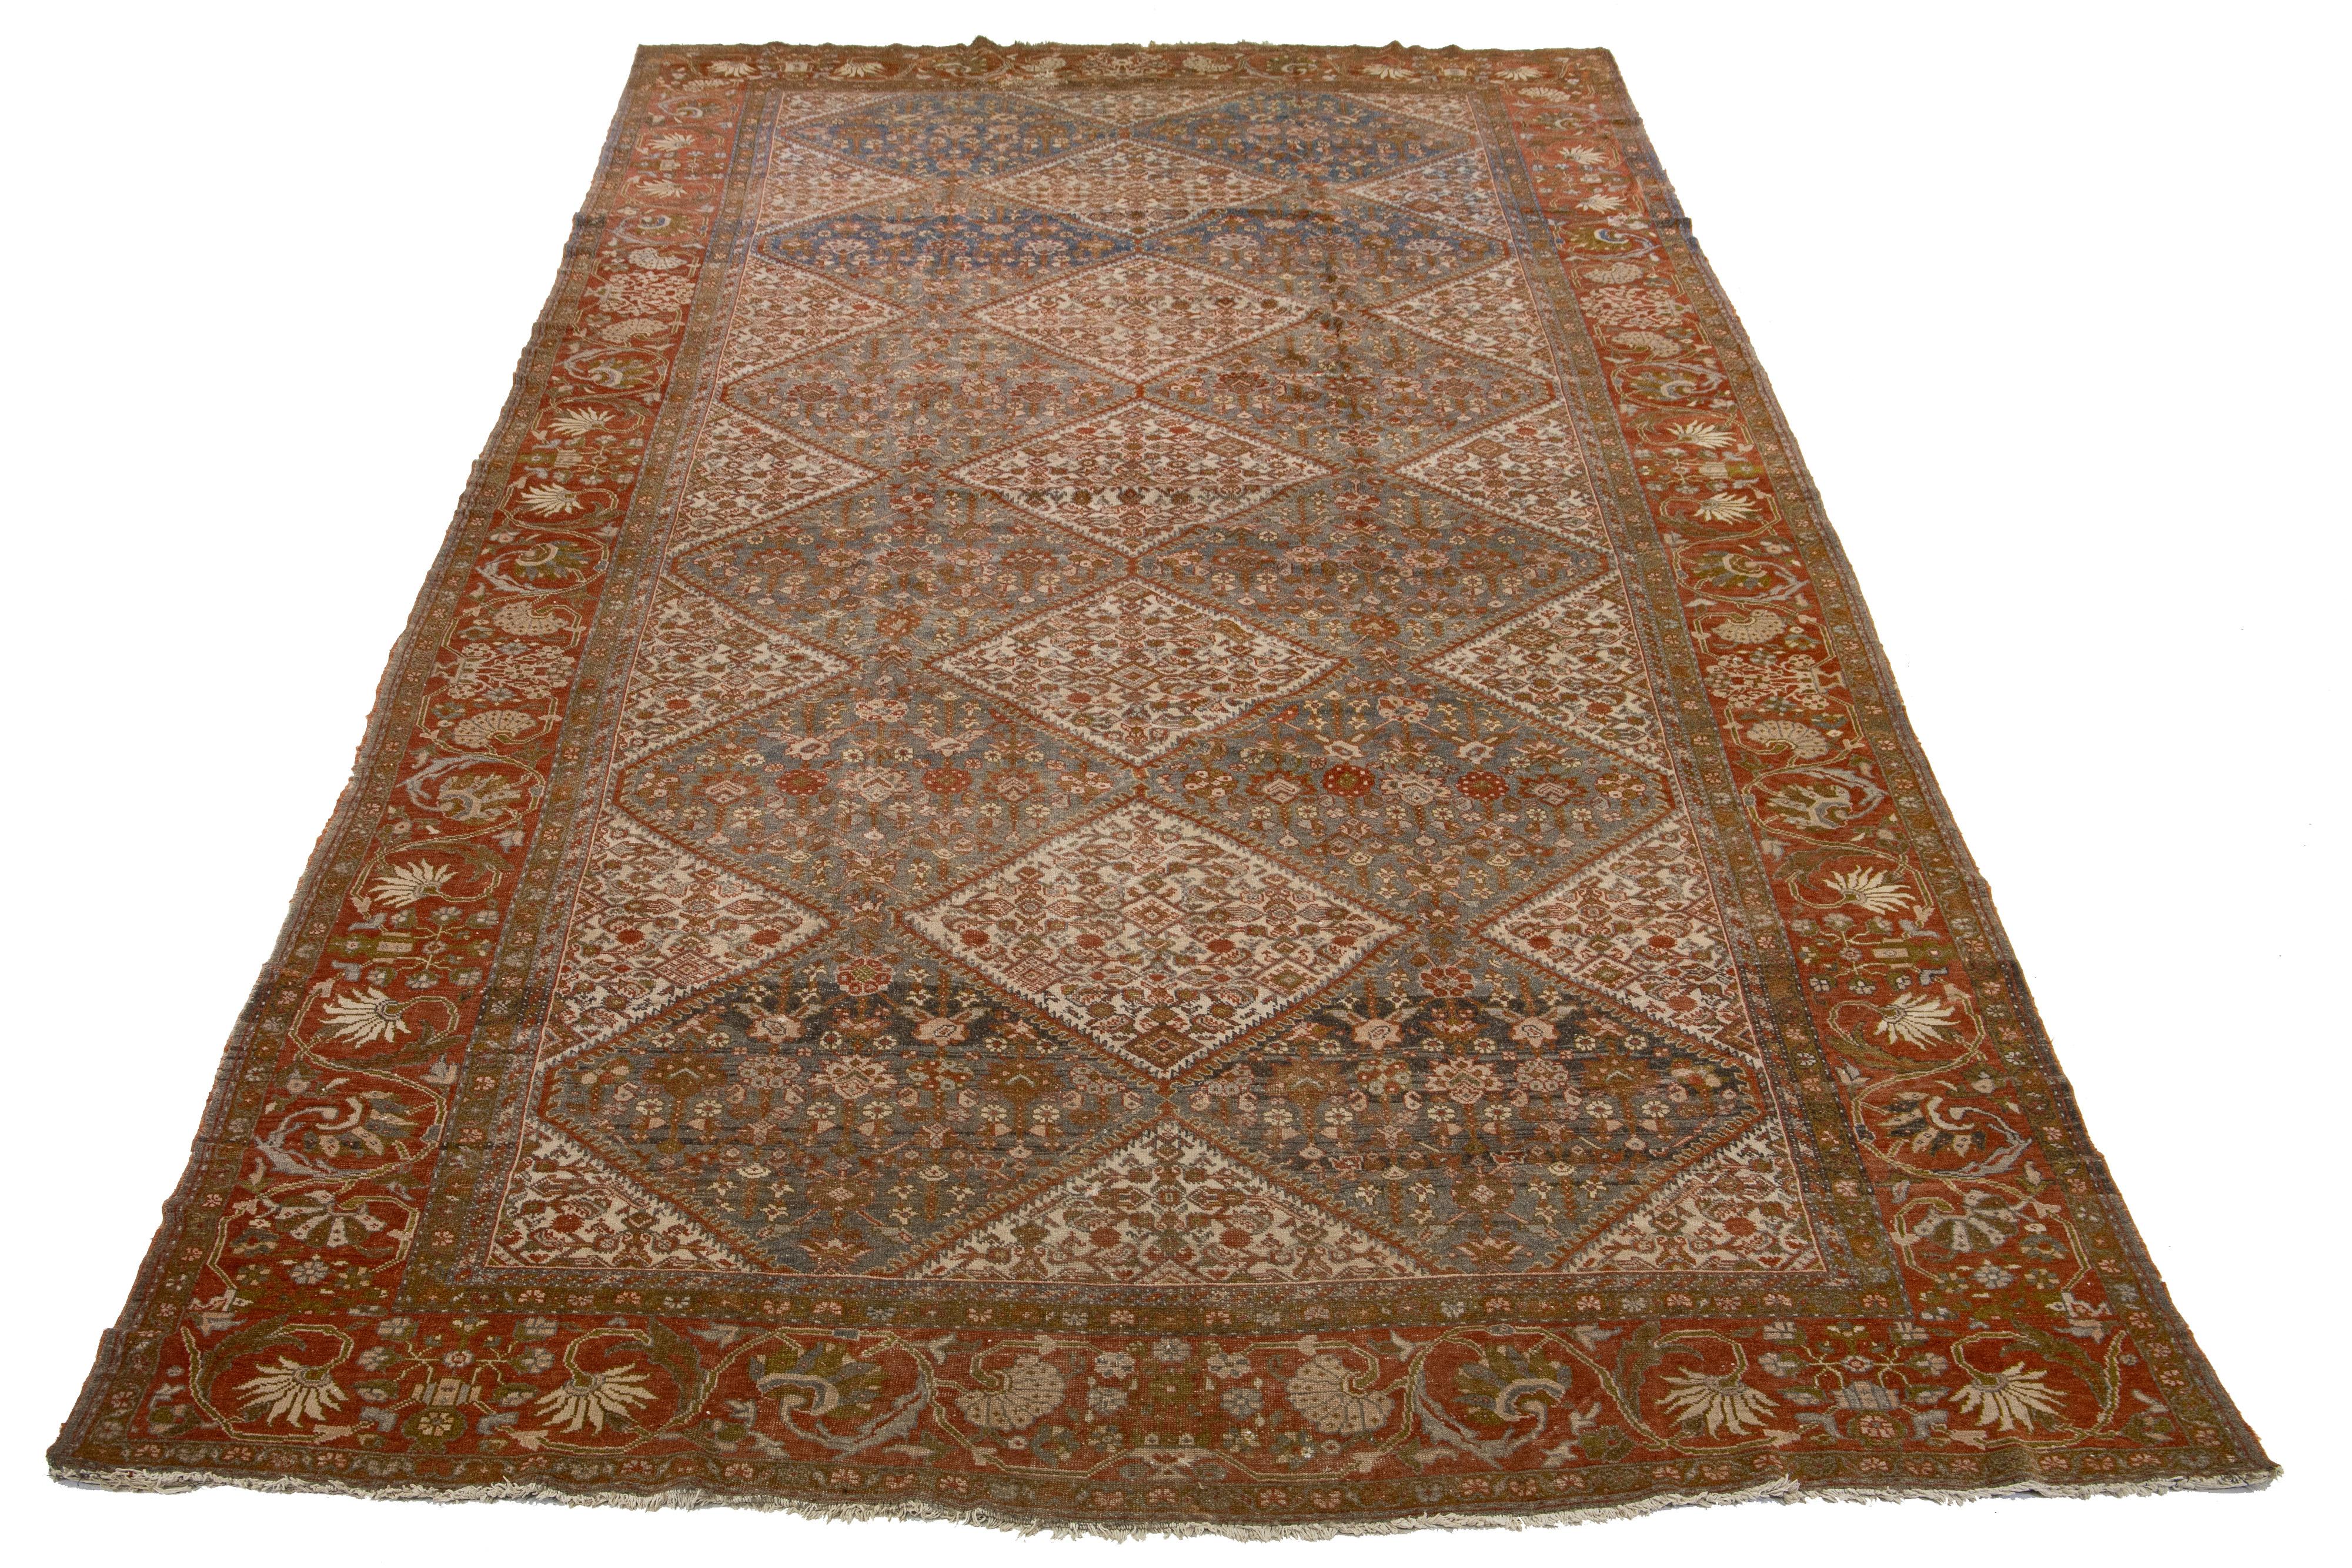 This beautiful oversized antique Mahal hand-knotted wool rug with a blue field. The Persian rug features a classic beige, rust, and brown floral motif.

This rug measures 10' x 20'2